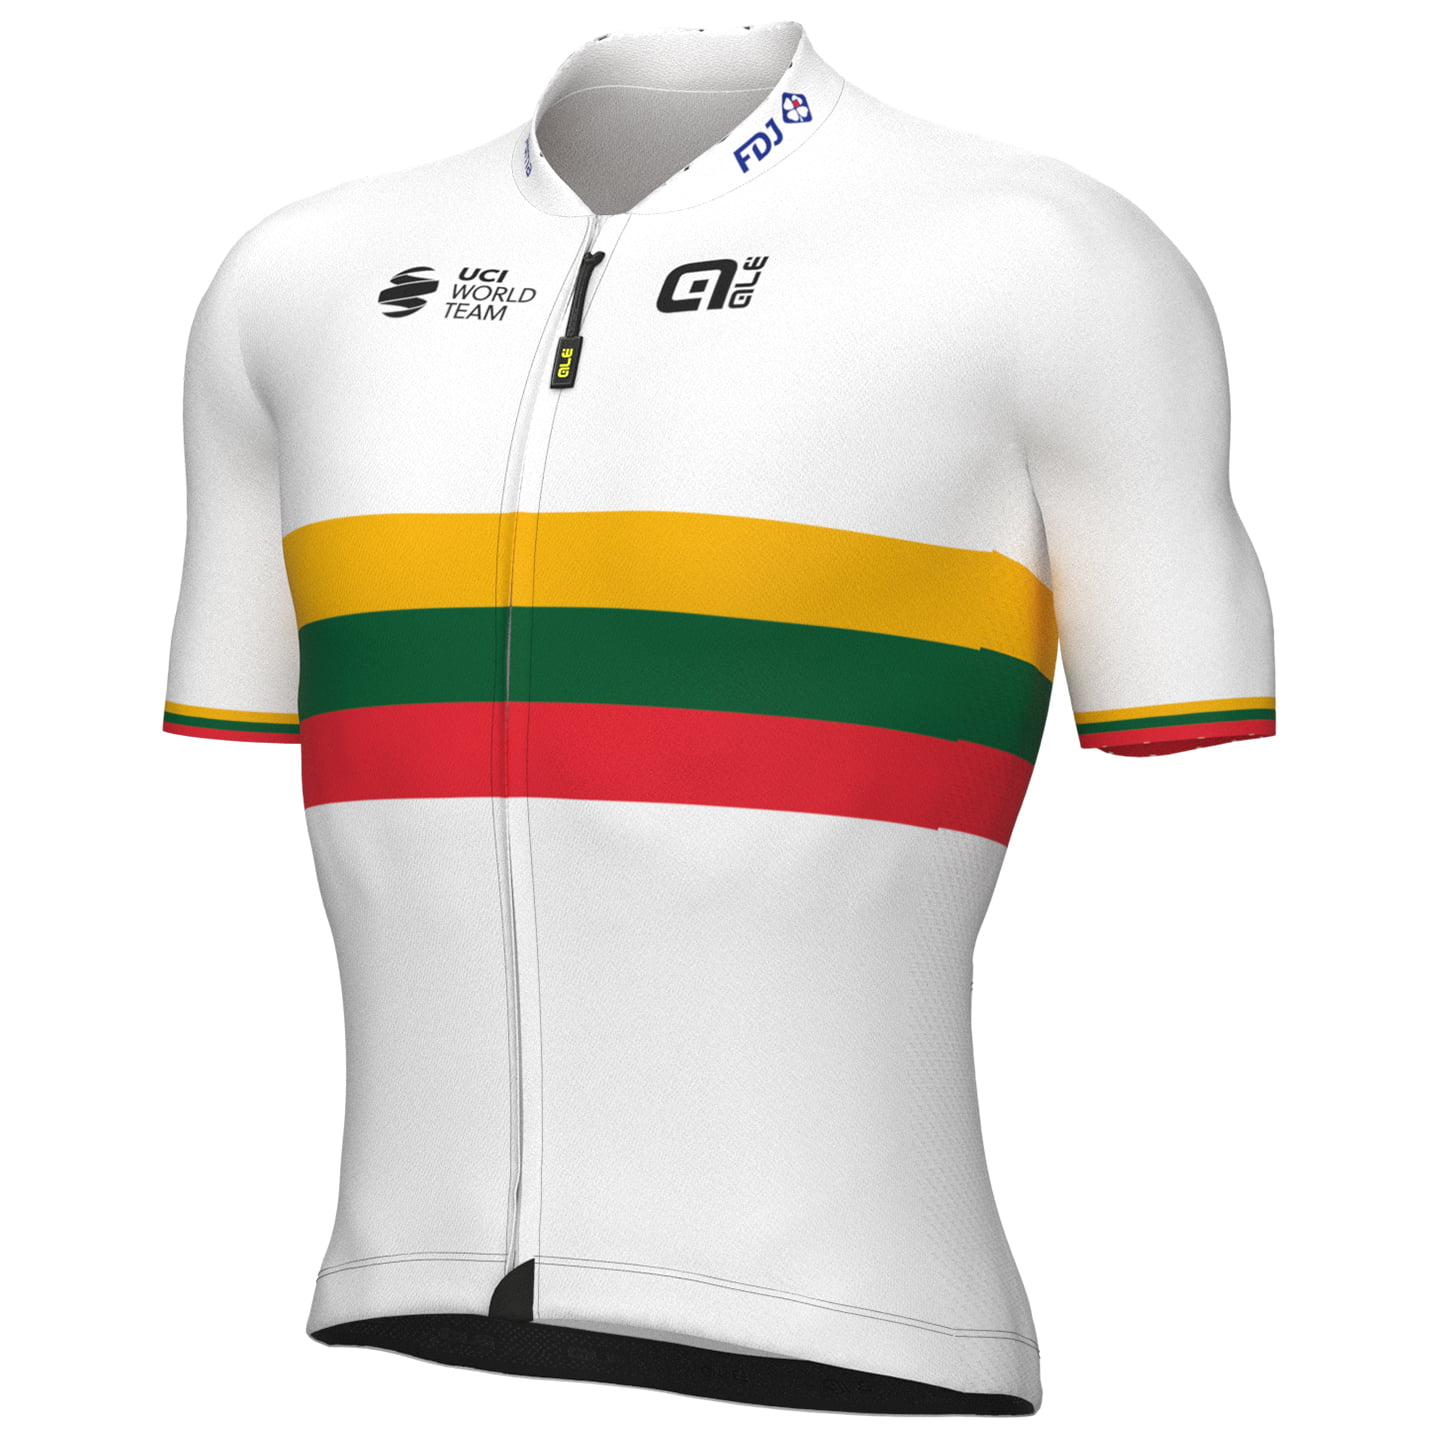 GROUPAMA-FDJ Lithuanian Champion 2022 Short Sleeve Jersey, for men, size S, Cycling jersey, Cycling clothing